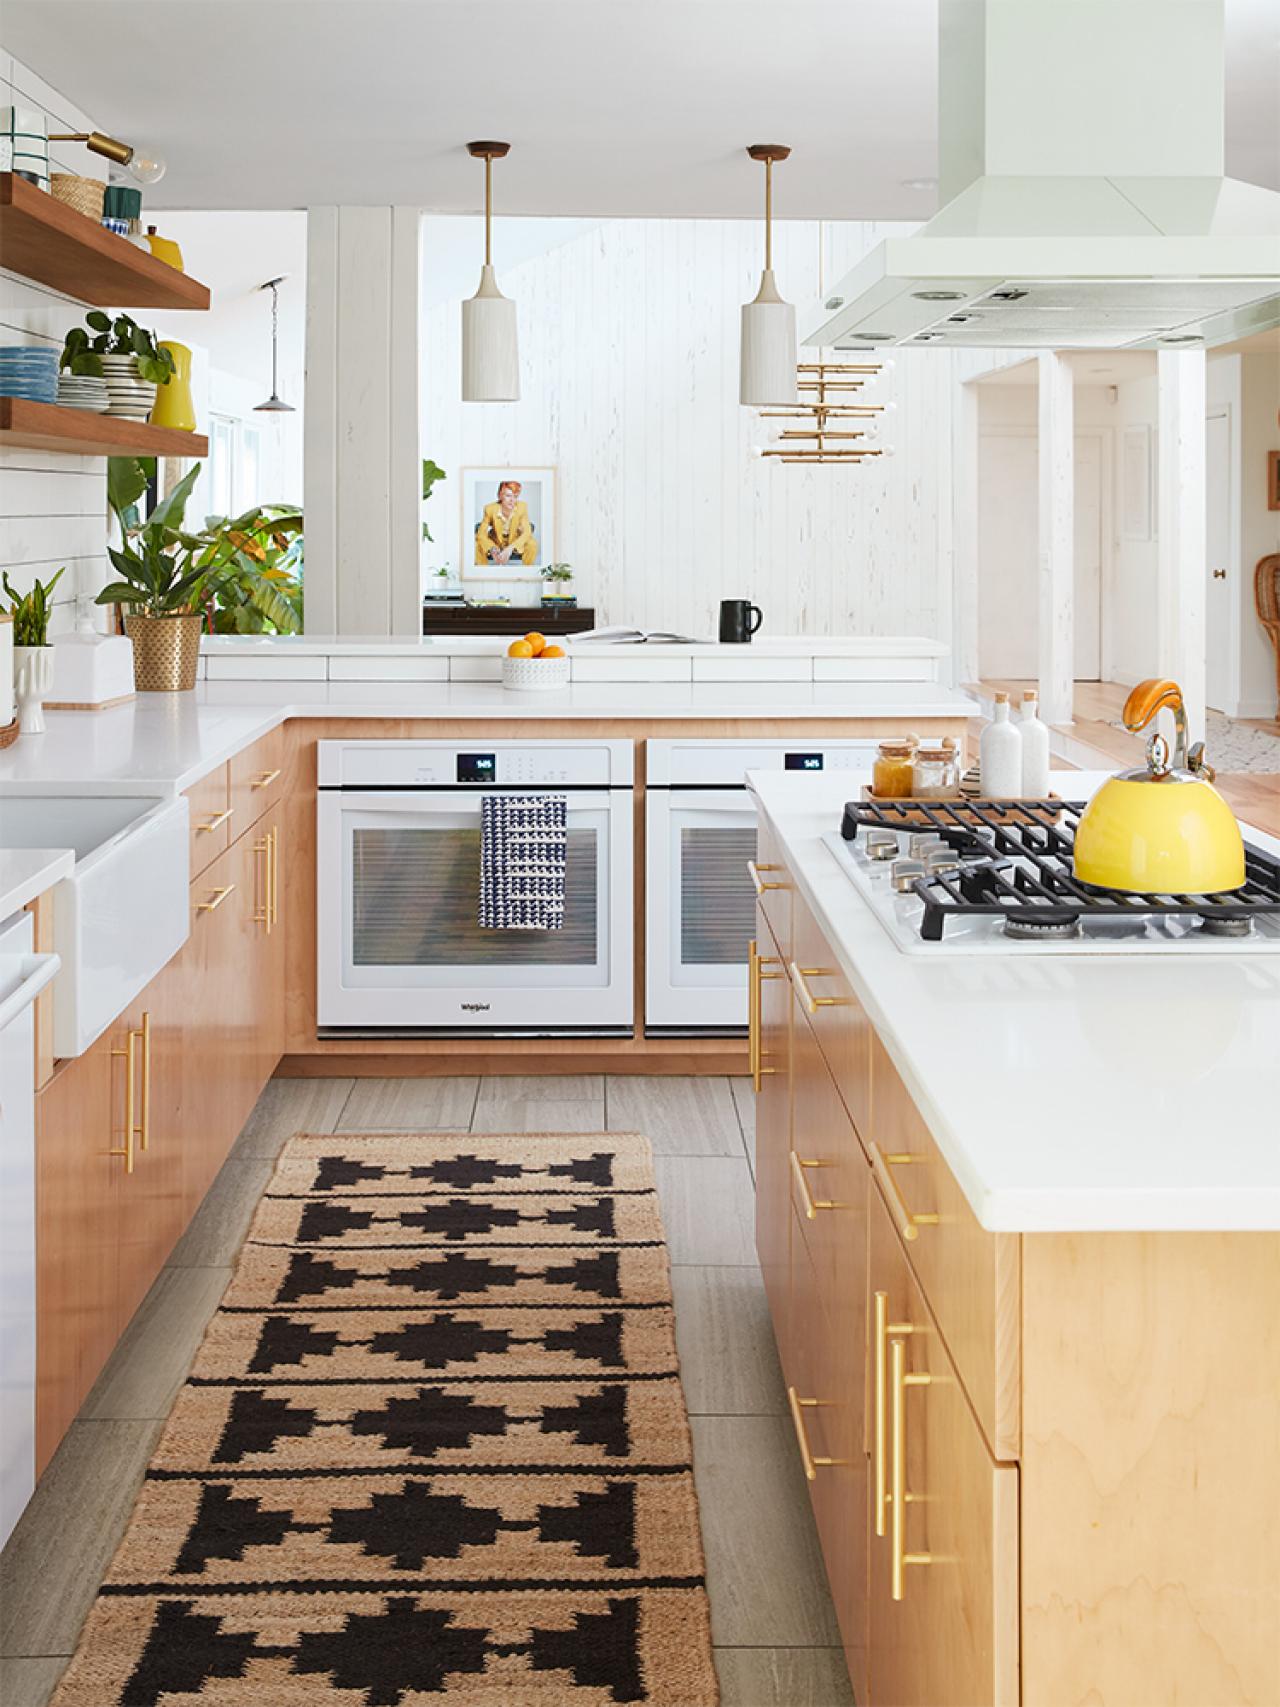 A Bright Kitchen Renovation With Addorable Ideas to Steal   HGTV ...